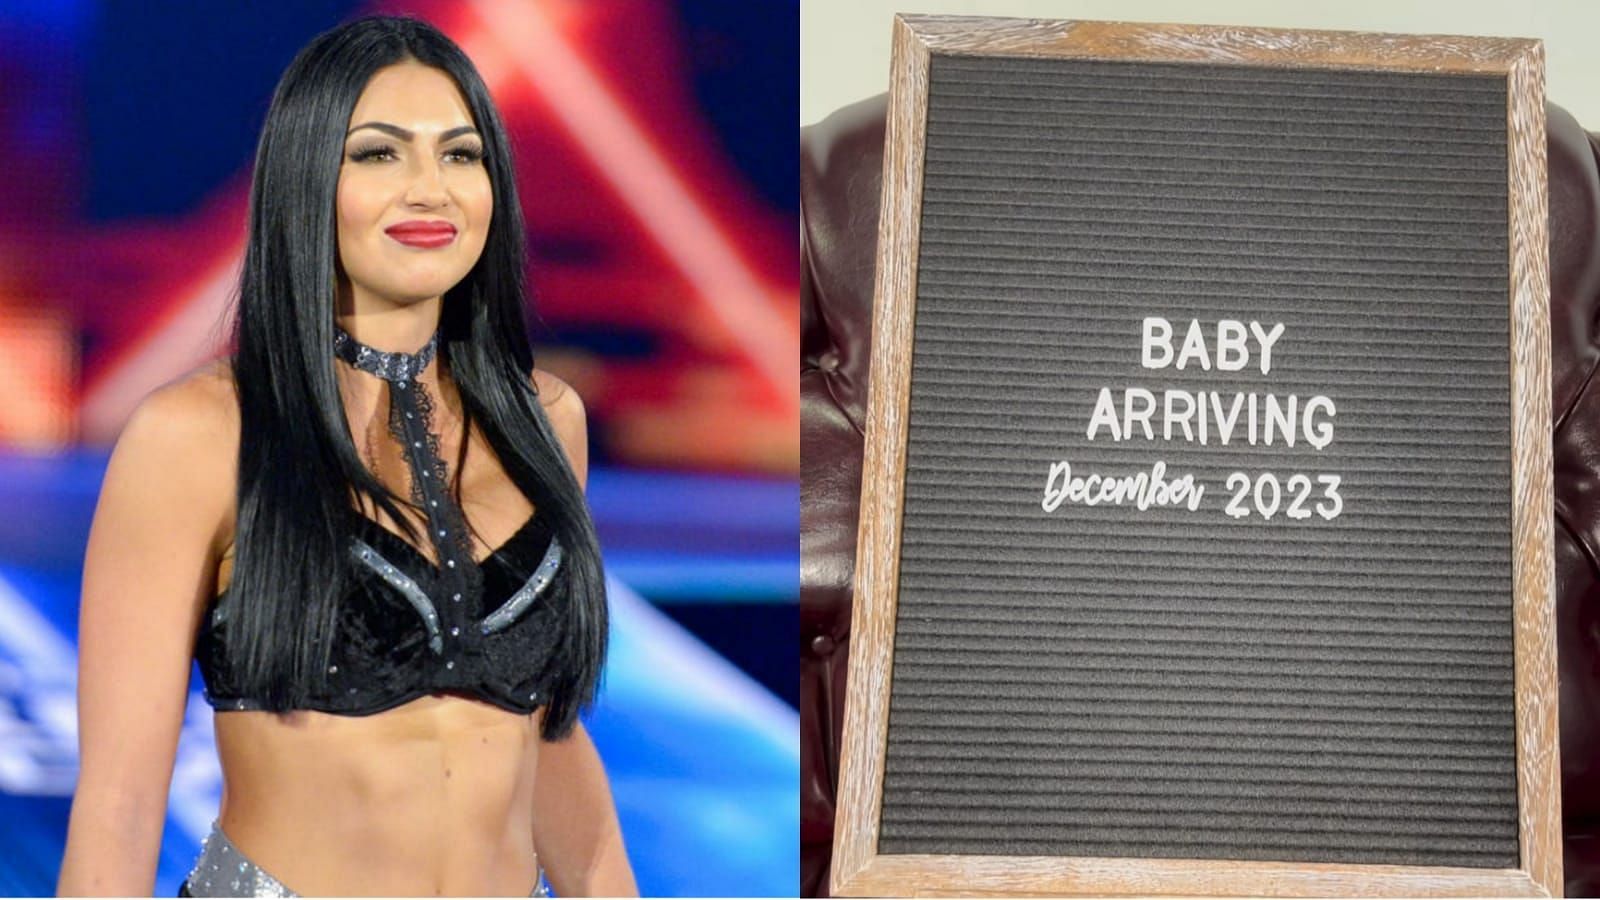 Billie Kay recently announced her pregnancy!